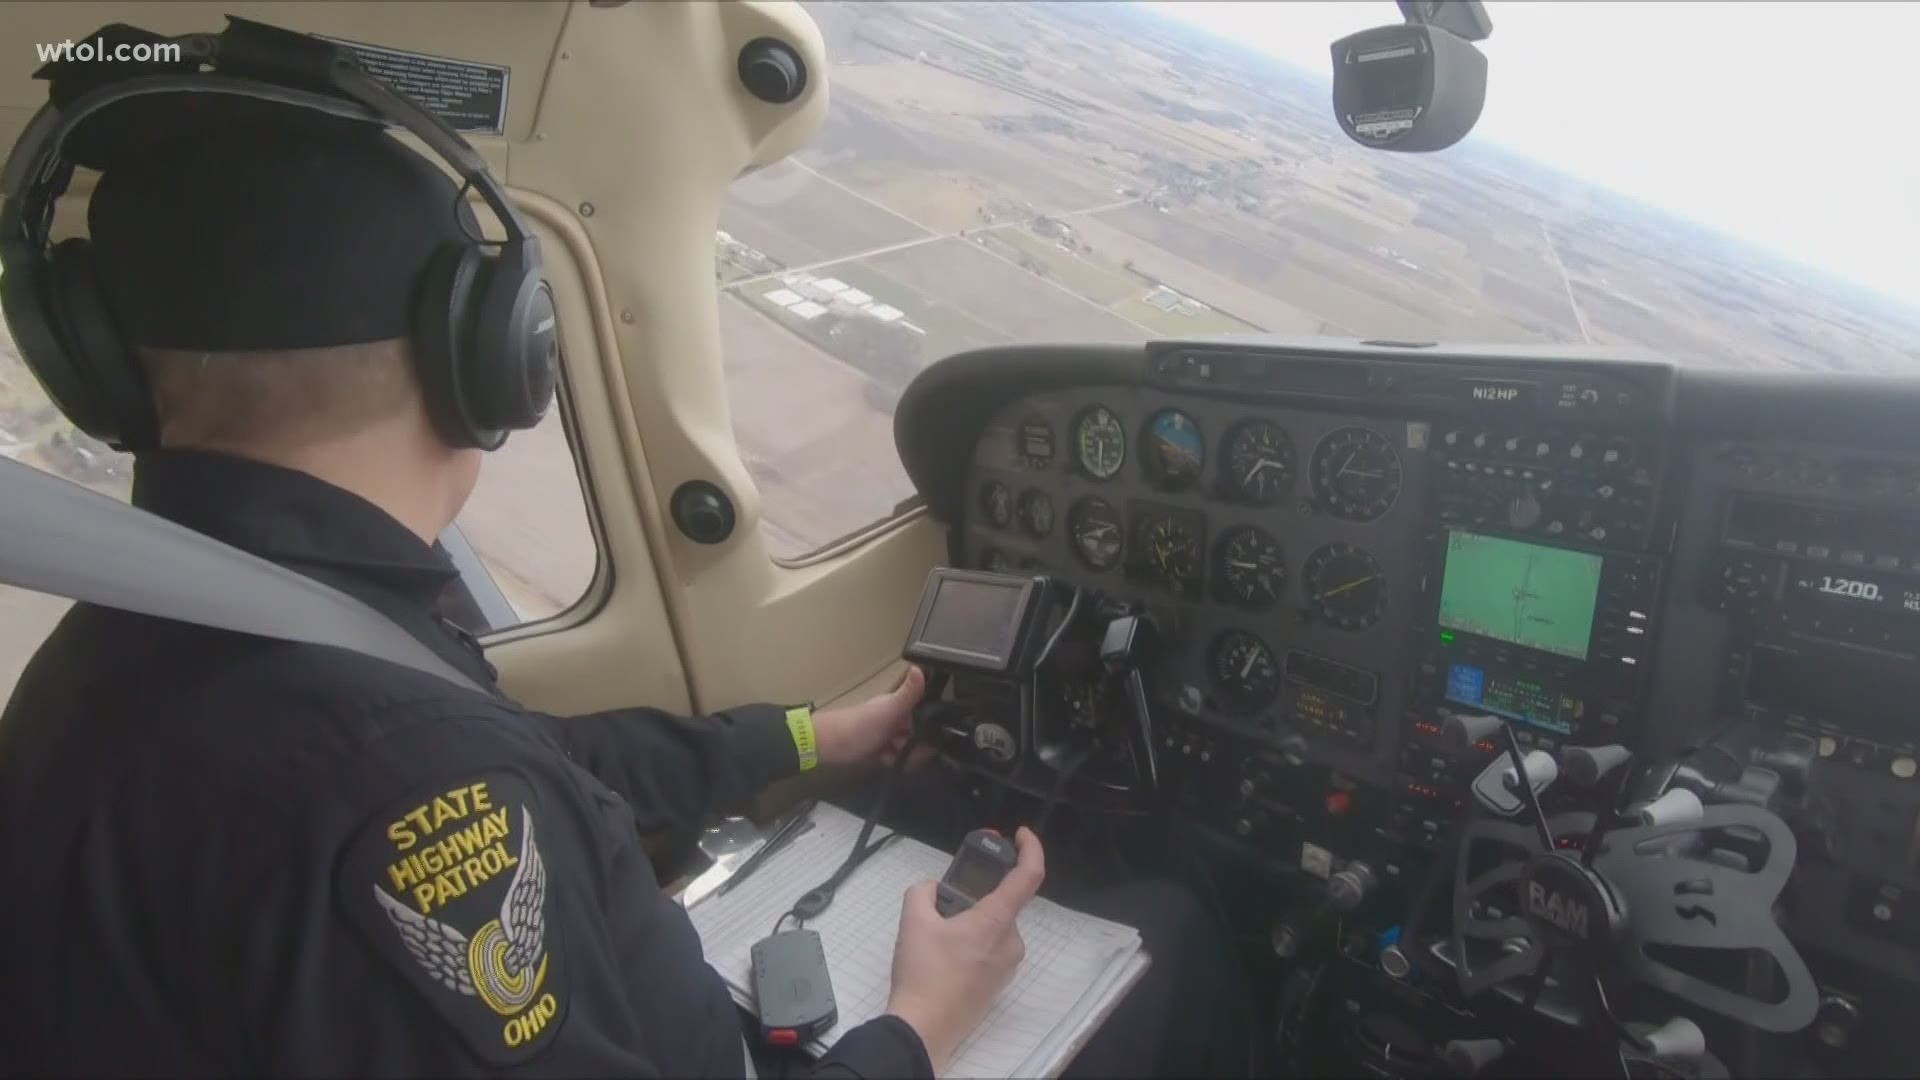 Search and rescue, traffic violations and more. Here are some of the many ways that the Ohio State Highway Patrol utilize aircraft to protect and serve the public.